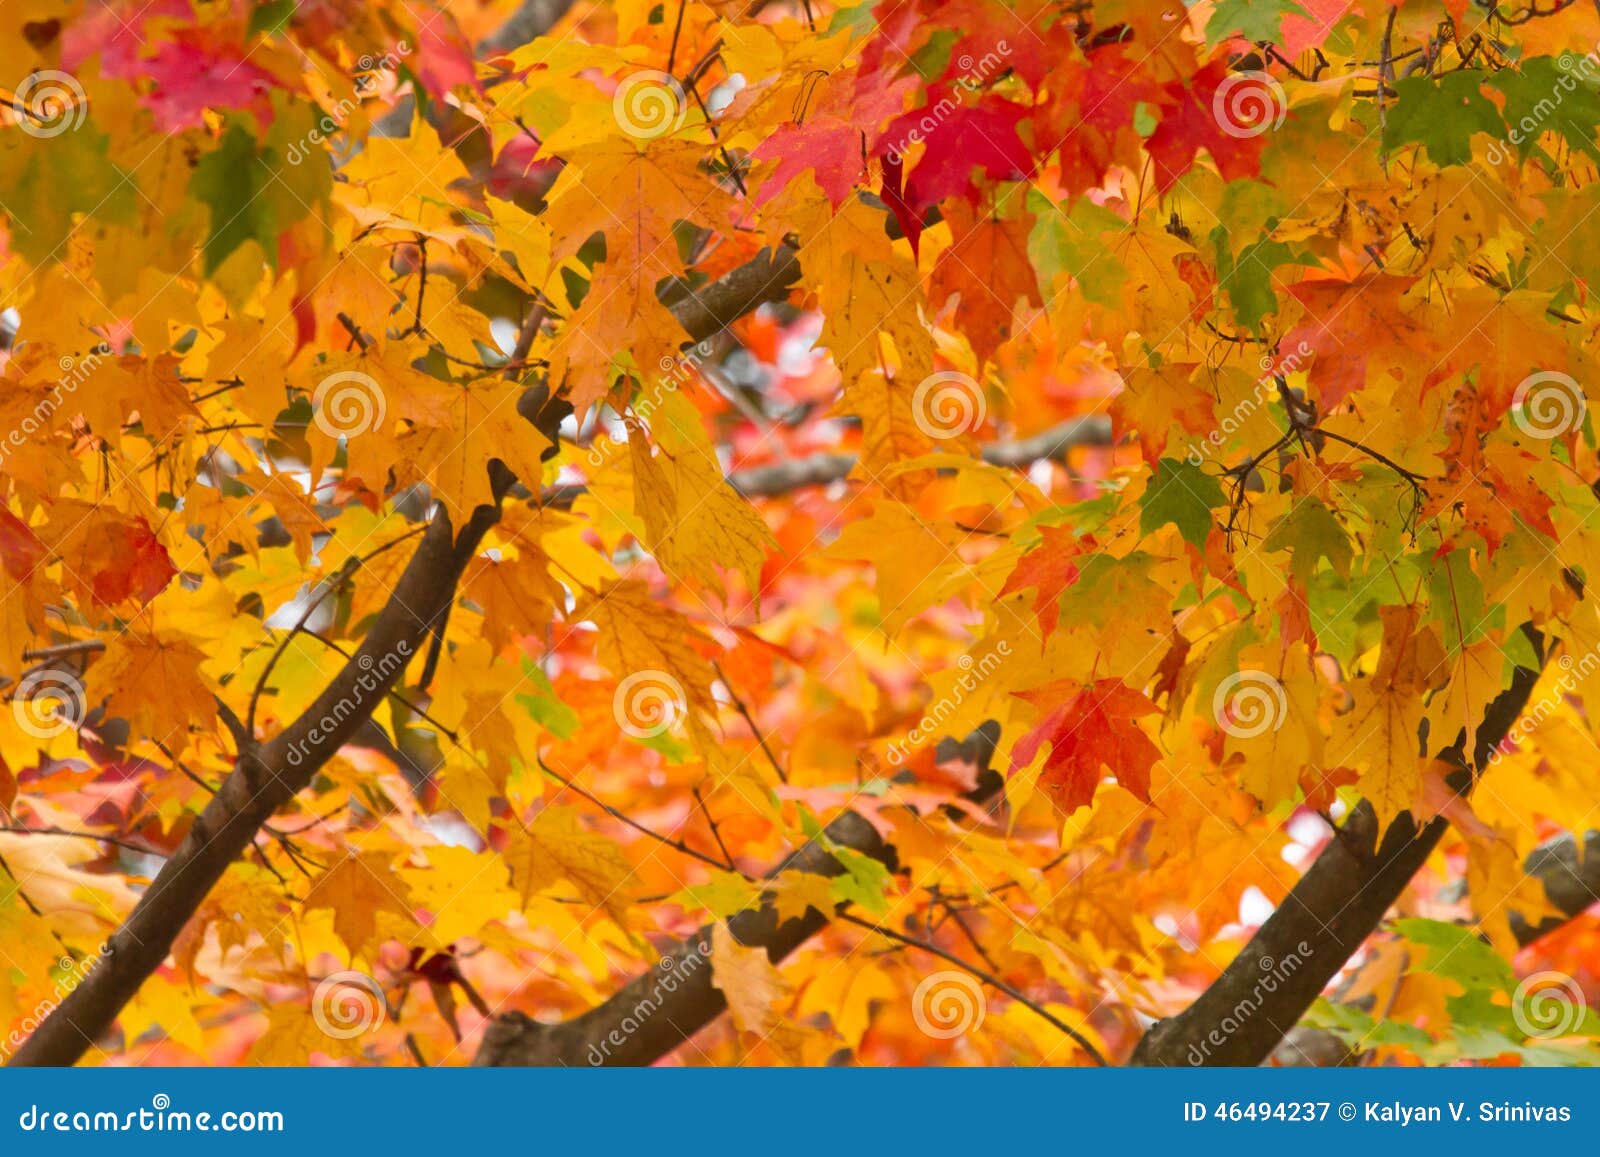 Fall Leaf Identifier  Leaves and Fall Foliage of New York